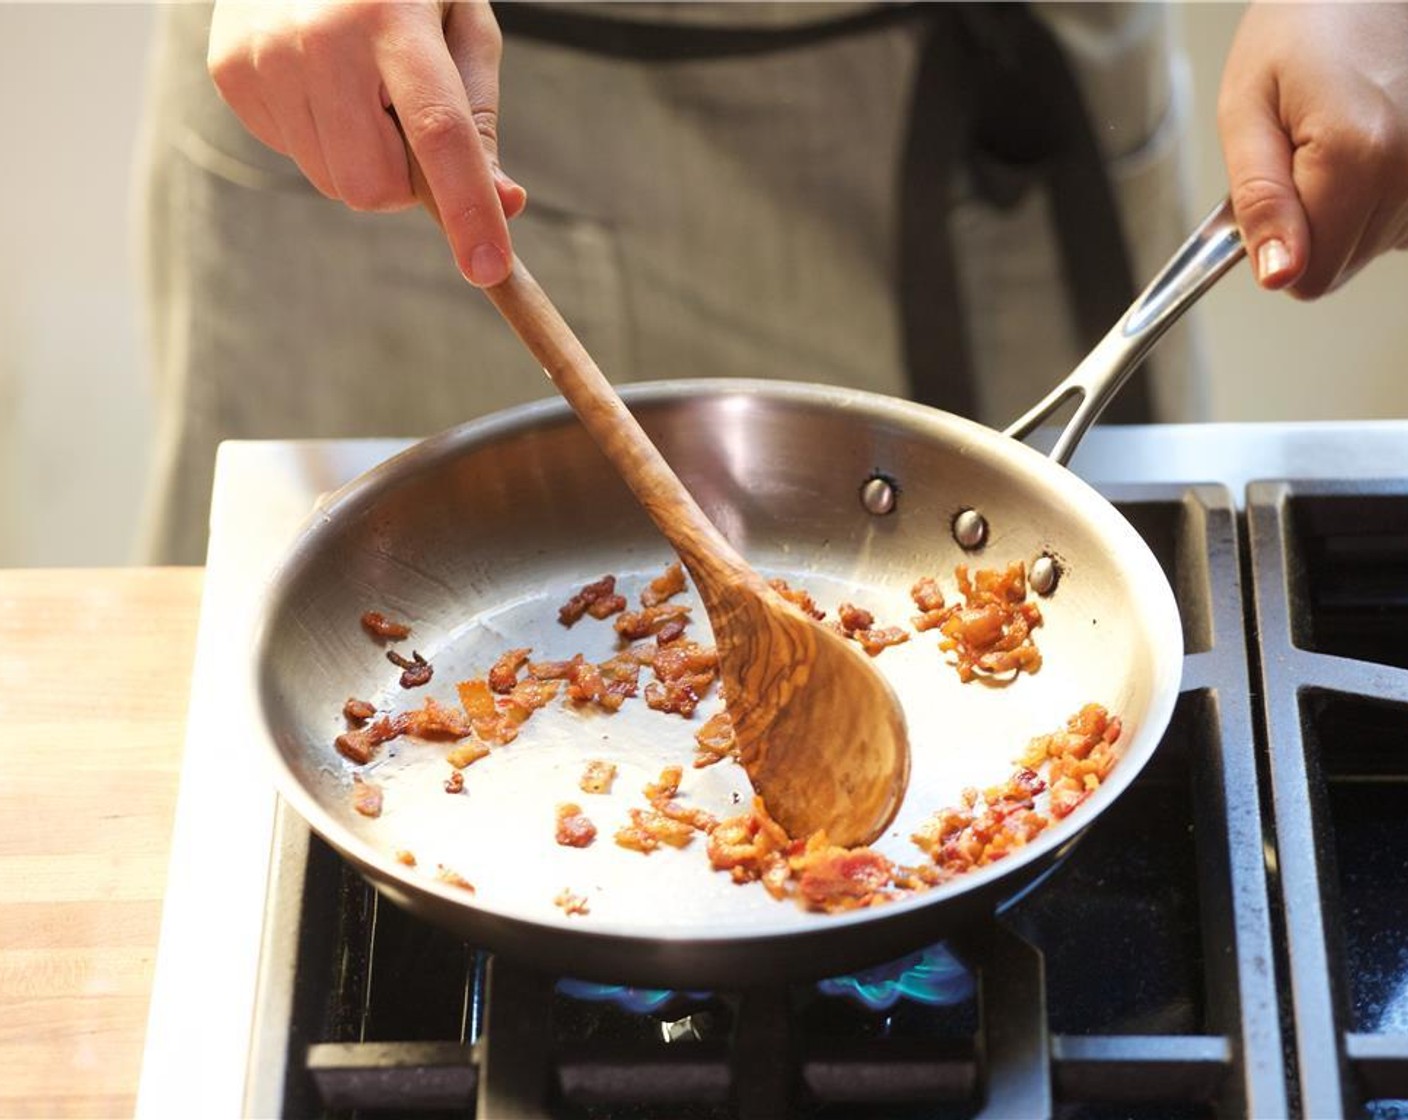 step 7 Using a slotted spoon, remove the bacon and place on a paper towel to drain. In the same medium saute pan over medium high heat, add the Cremini Mushroom (1 cup), Salt (1/4 tsp) and Ground Black Pepper (1/4 tsp). Cook for two minutes until golden brown.